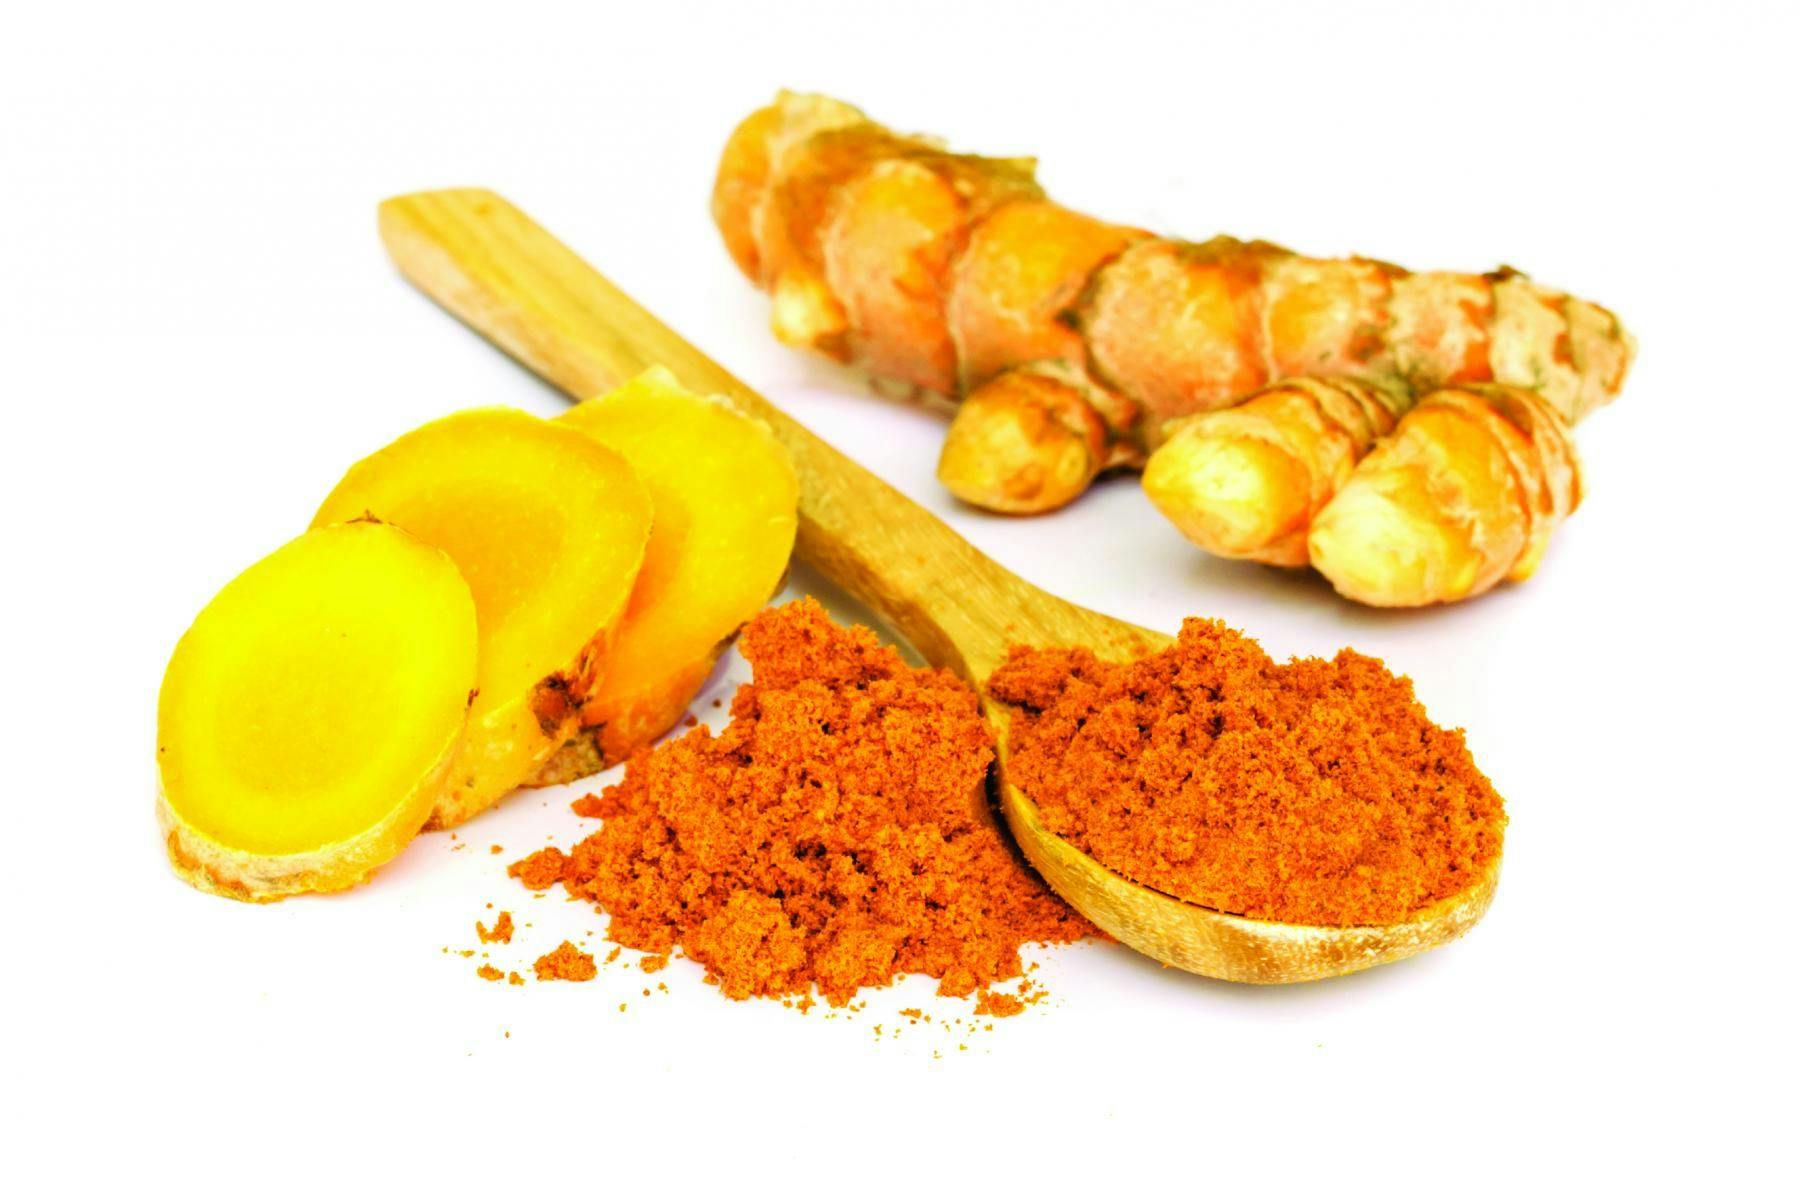 2018 Ingredient Trends to Watch for Food, Drinks, and Dietary Supplements: Curcumin 